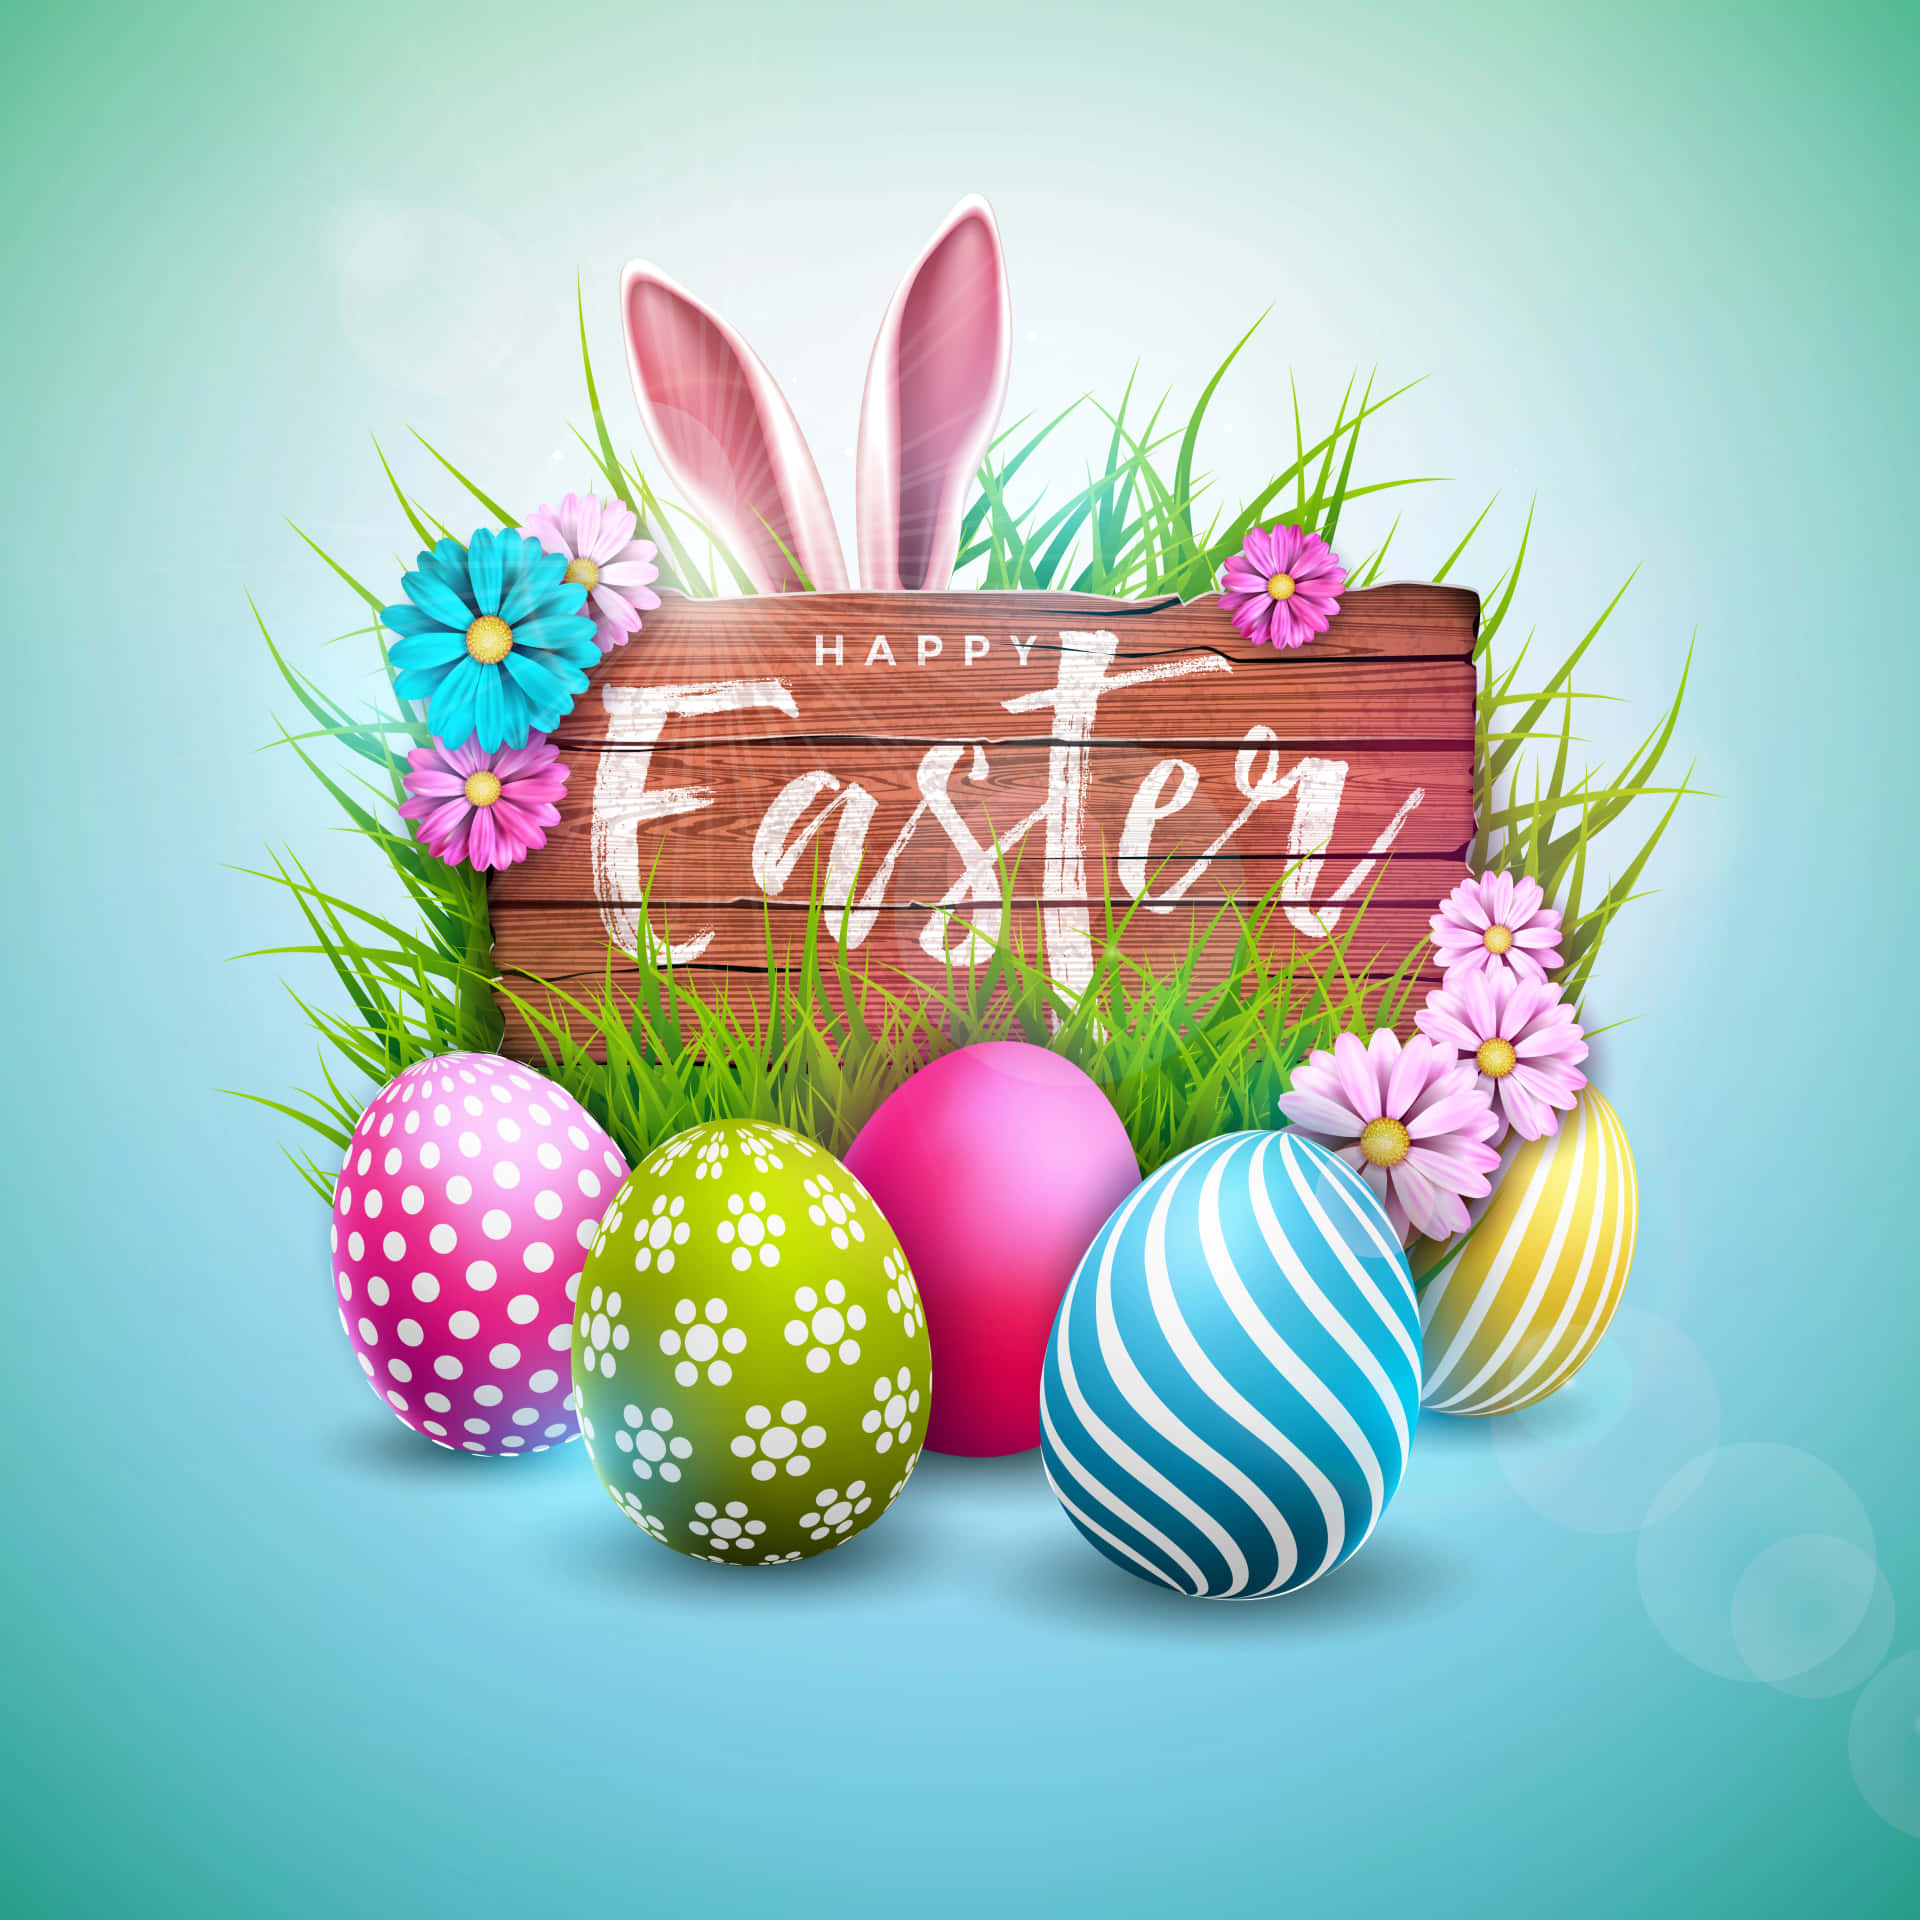 Download Celebrate Easter with Colorful Eggs | Wallpapers.com